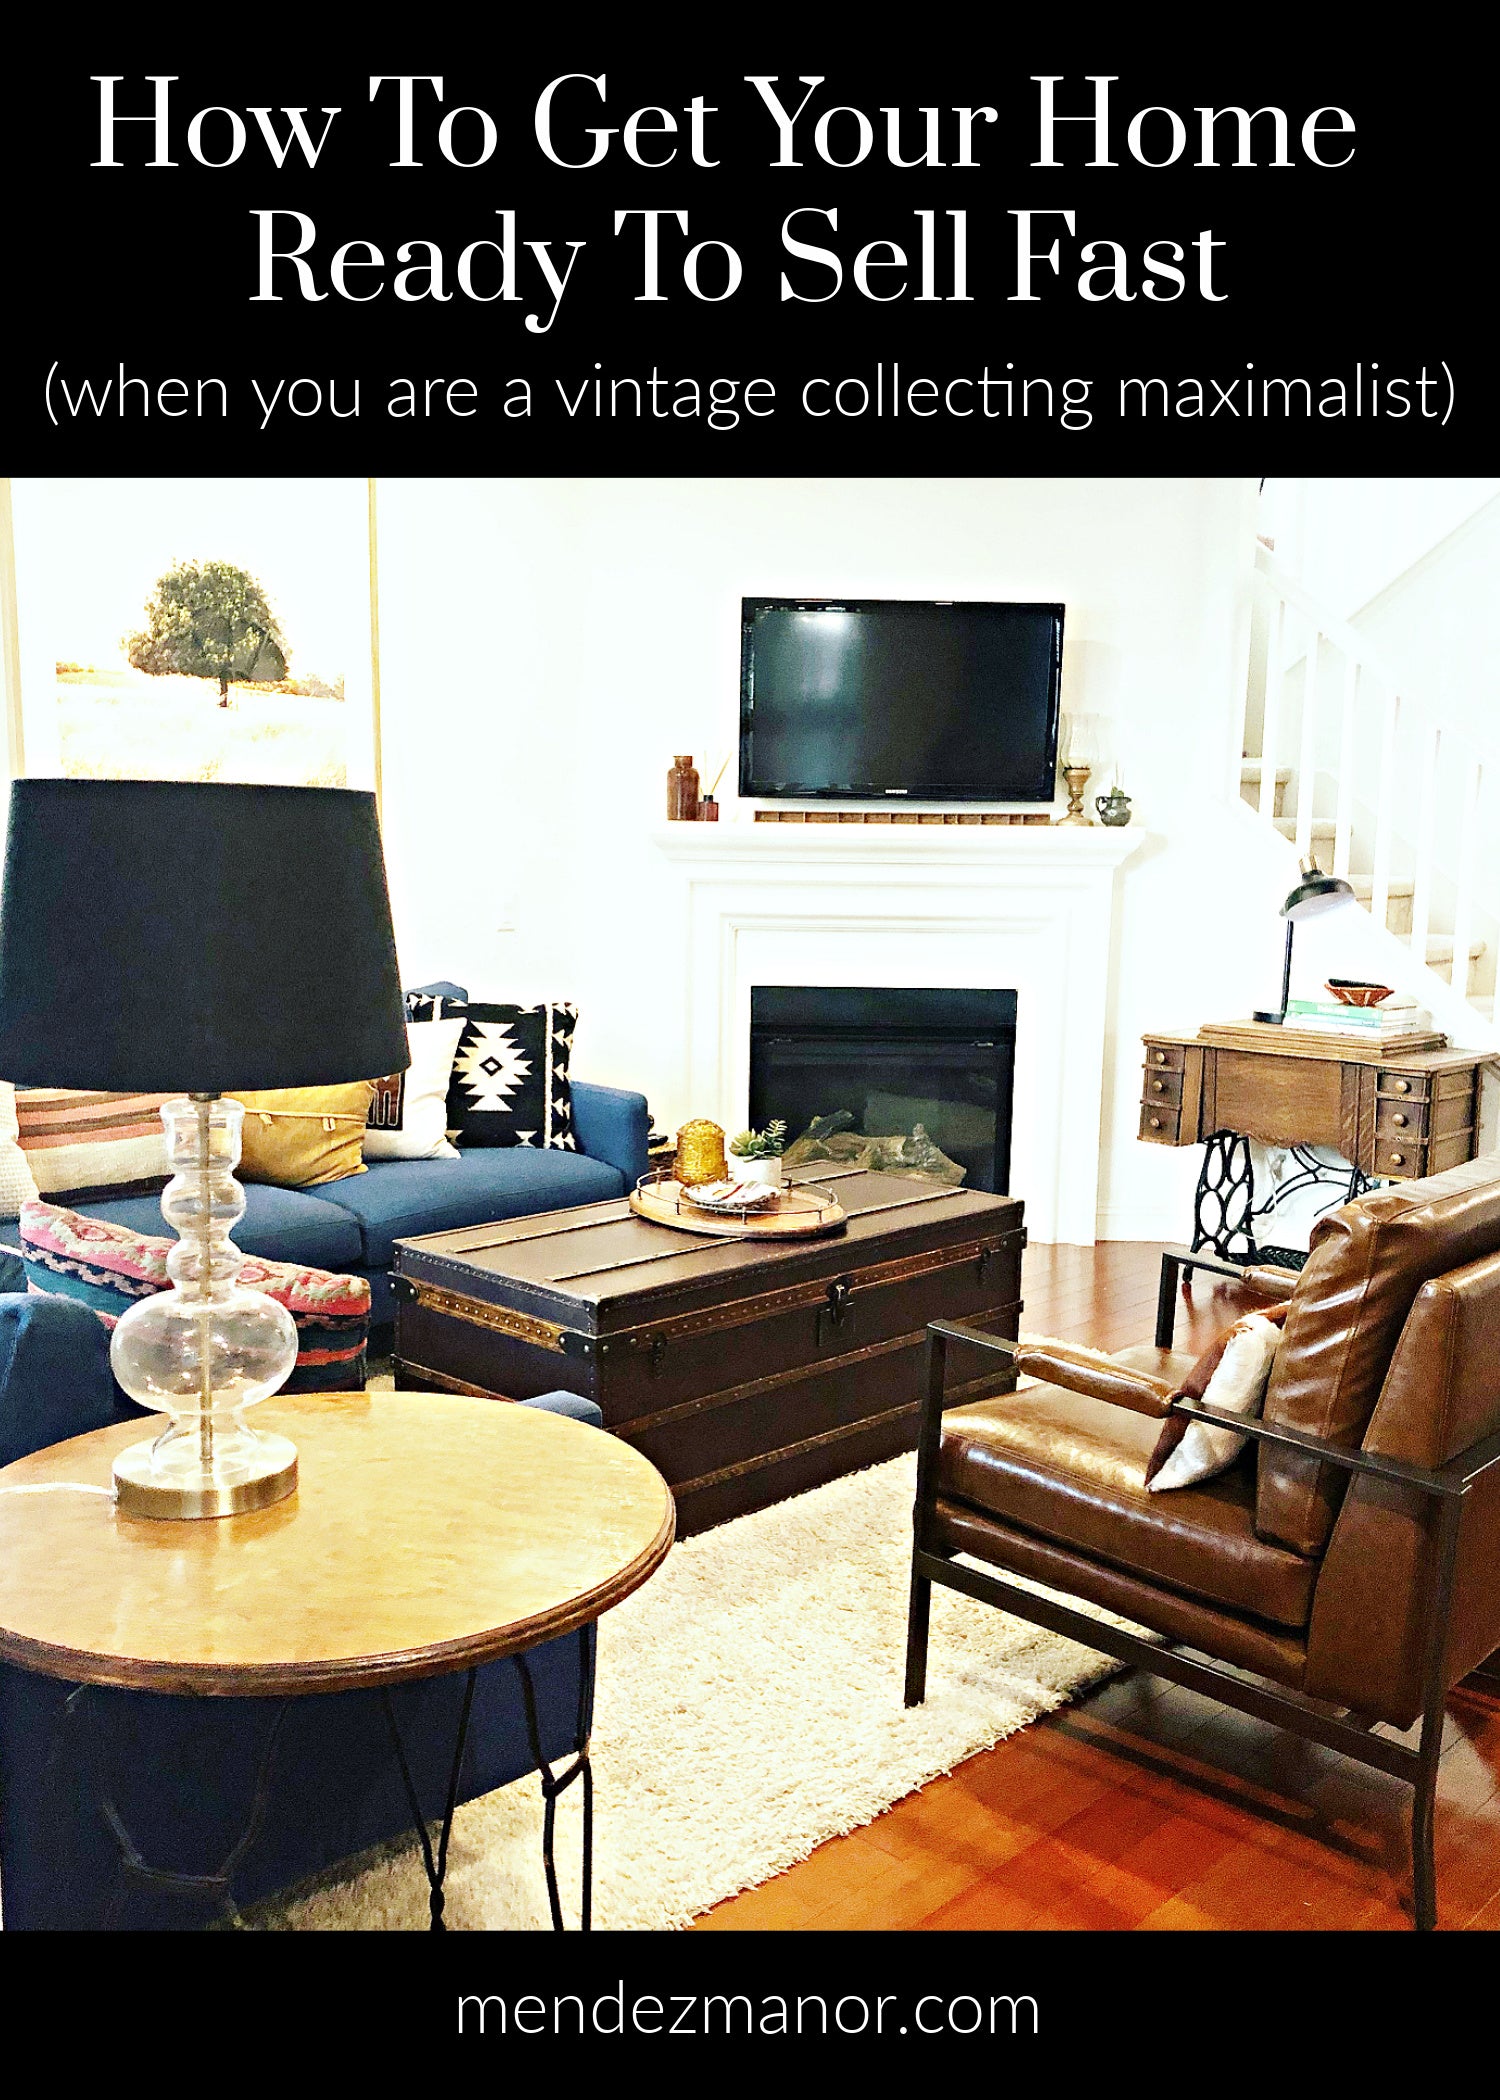 How To Get Your Home Ready To Sell Fast (when you are a vintage collecting maximalist)